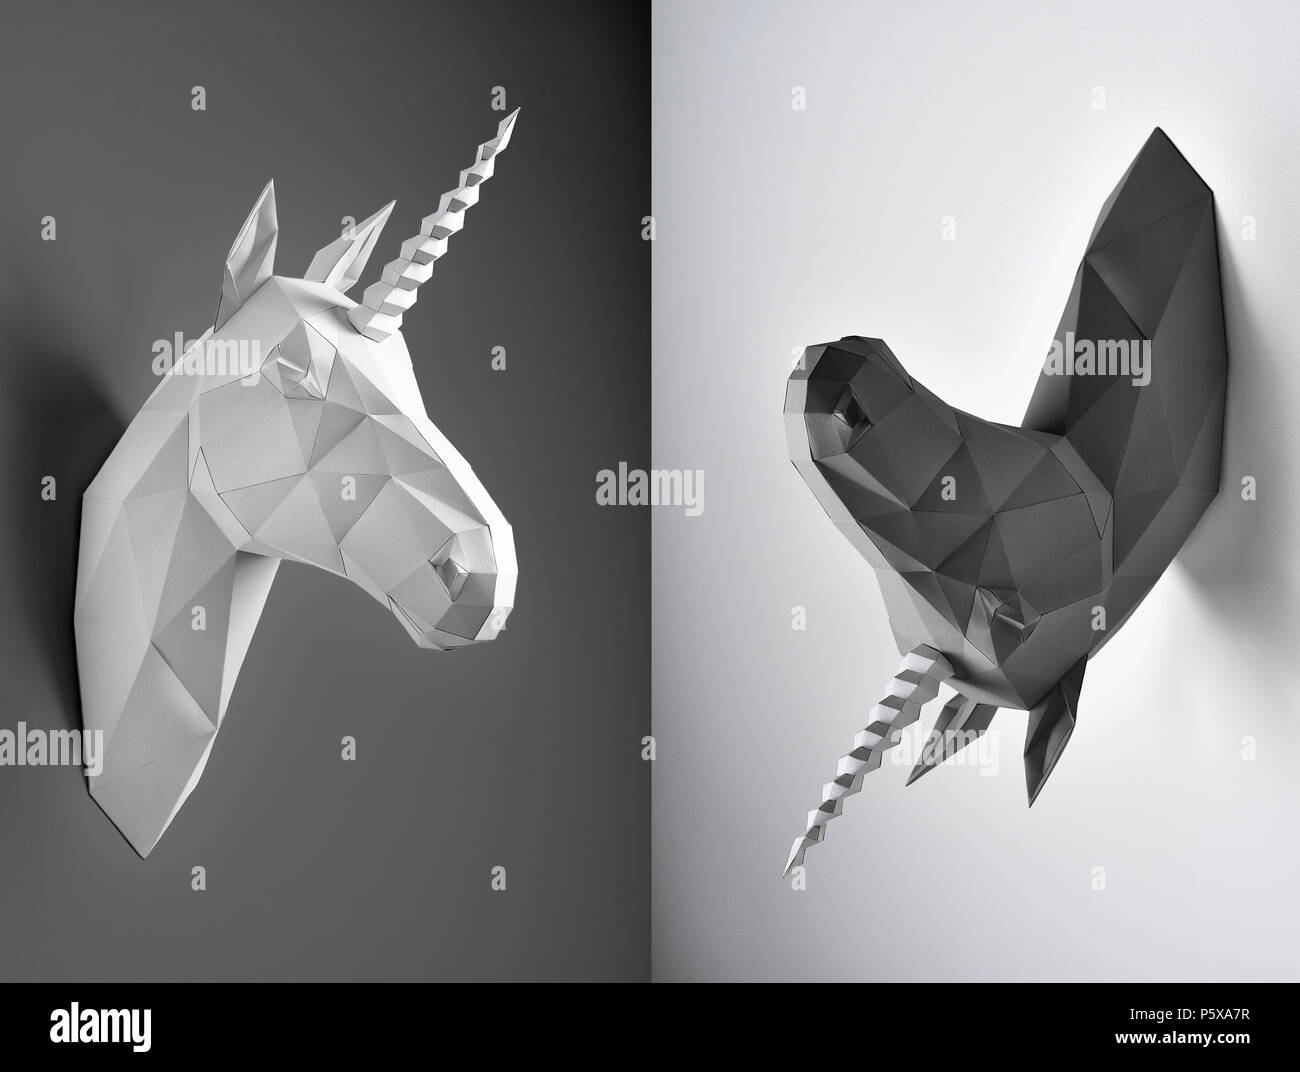 Contrast Collage Of Two Photos Of Black And White Unicorns